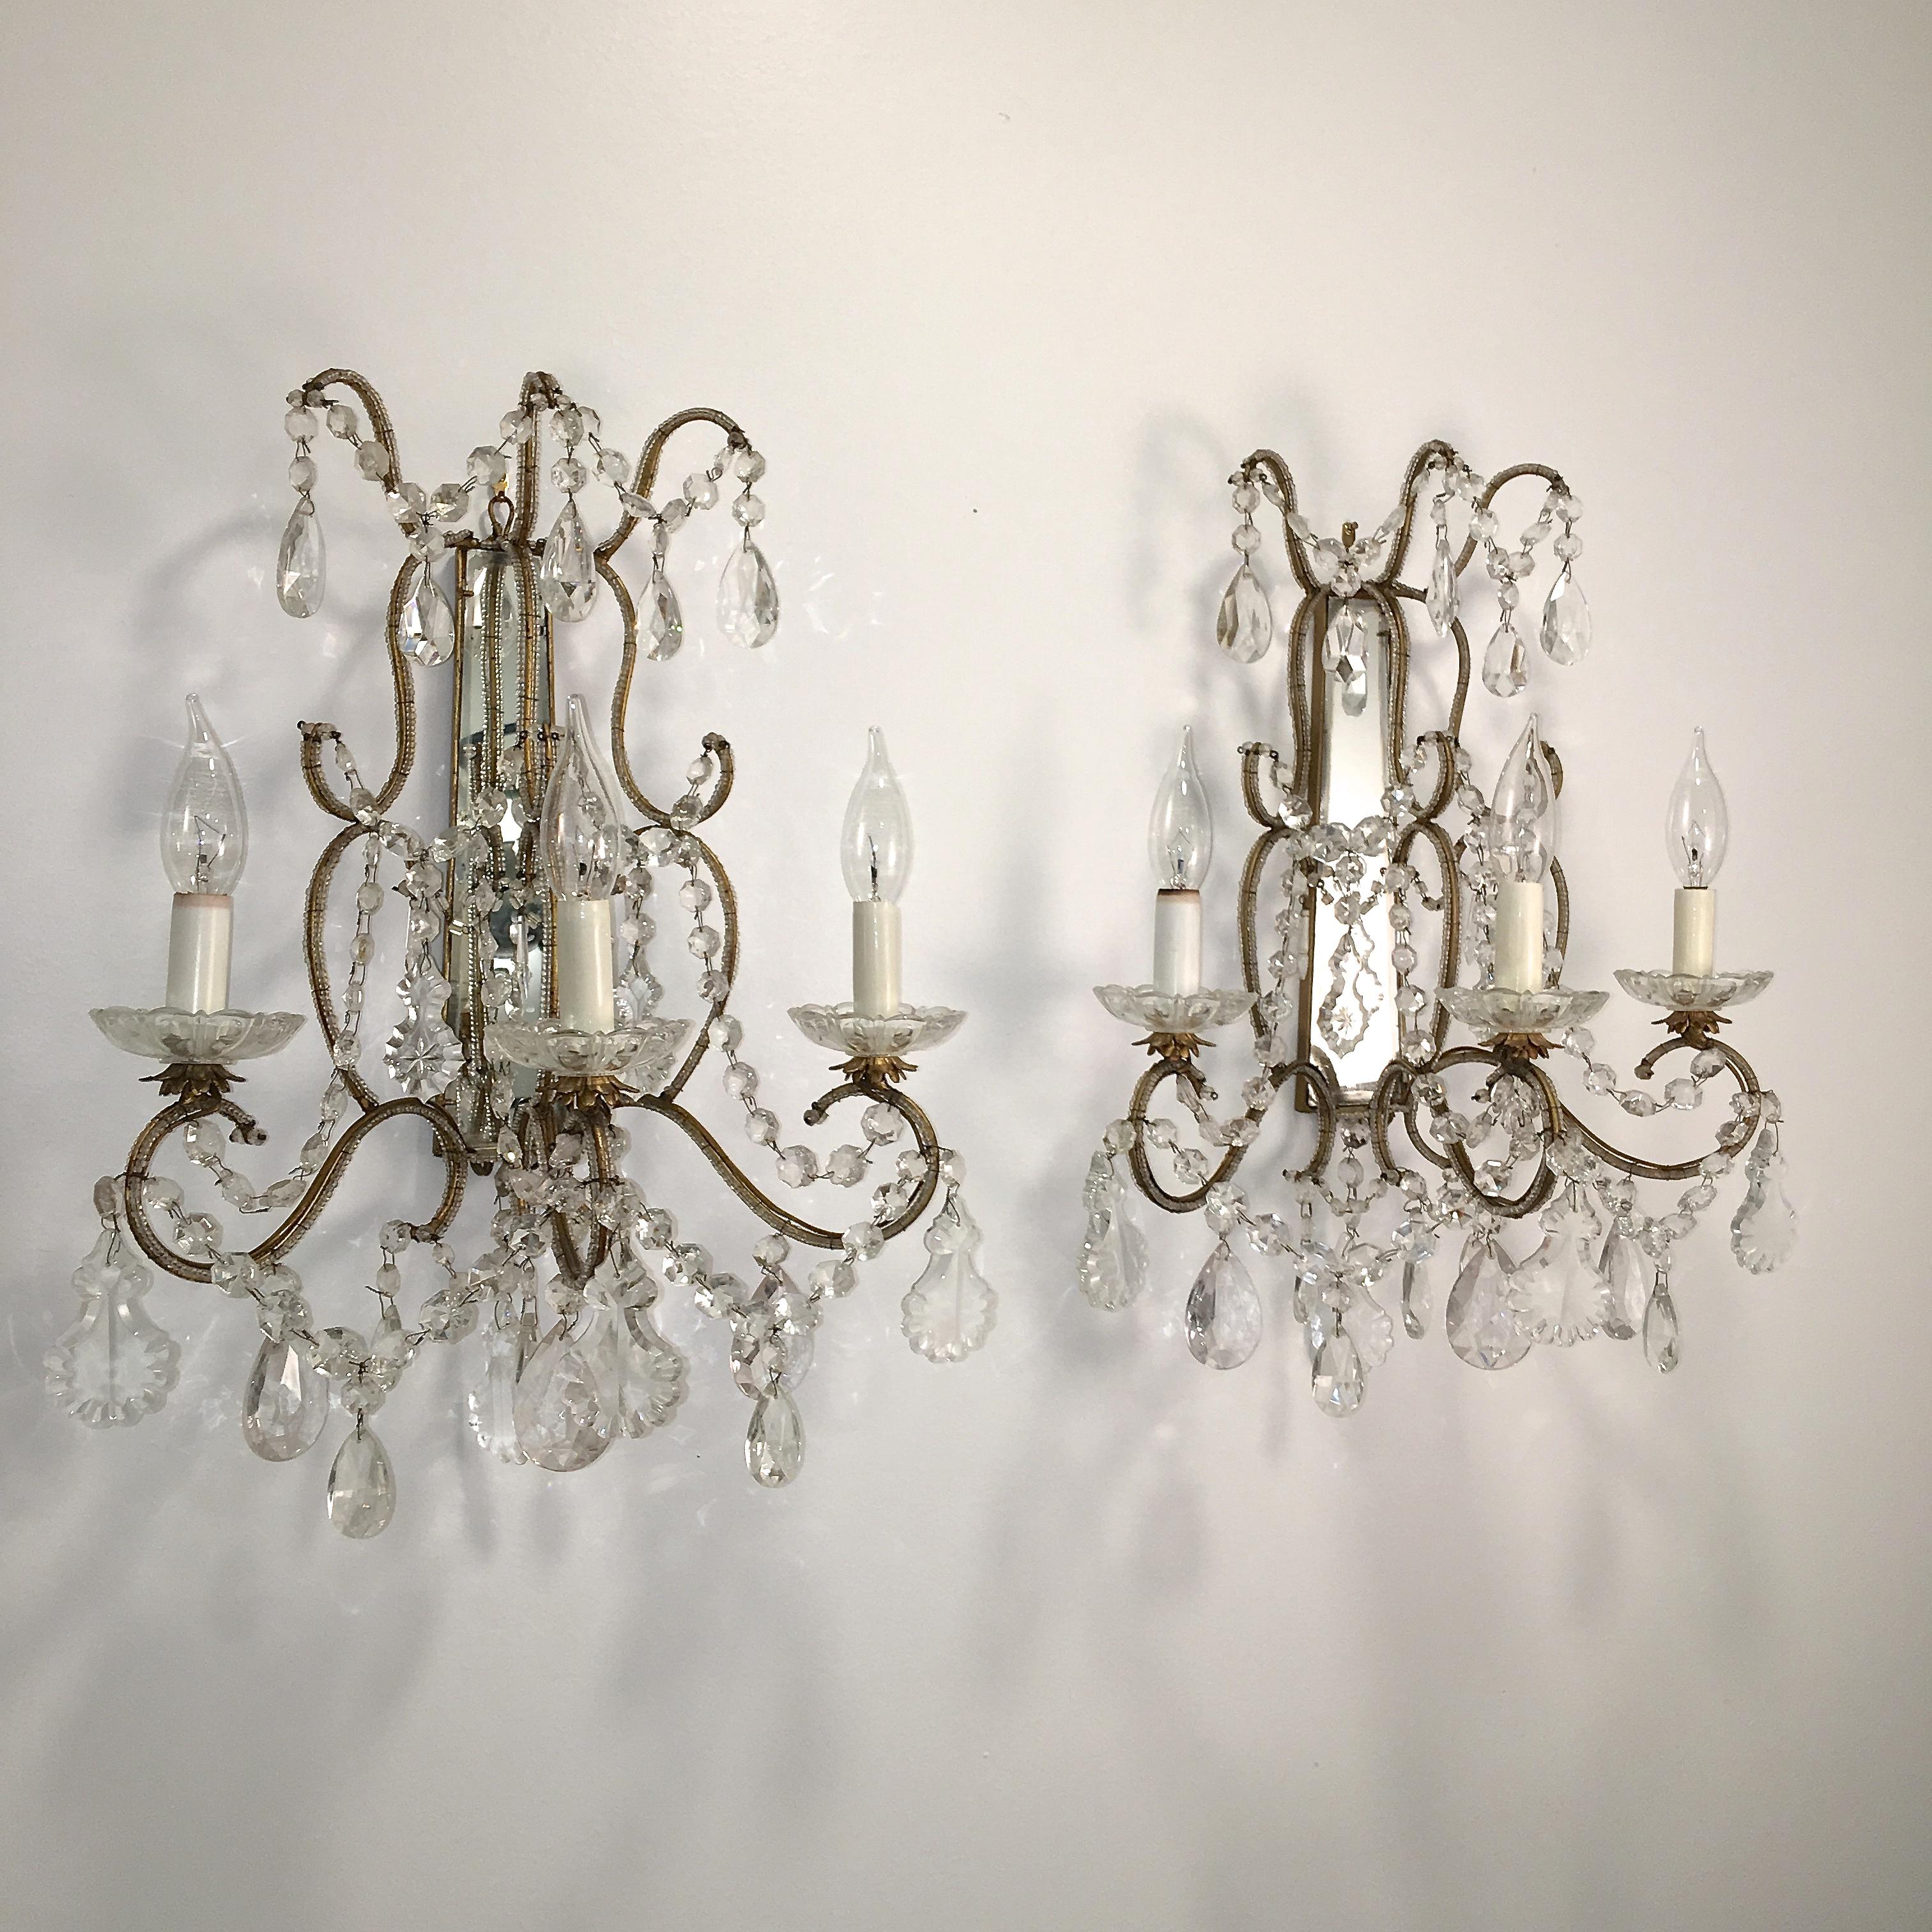 Pair of vintage Florentine beaded gilt metal and mirror framed three light sconces adorned with cut crystal garlands and drops. Wired for USA. Takes three candelabra size bulbs up to 250 watts per fixture.

Intended to be hard wired but can be